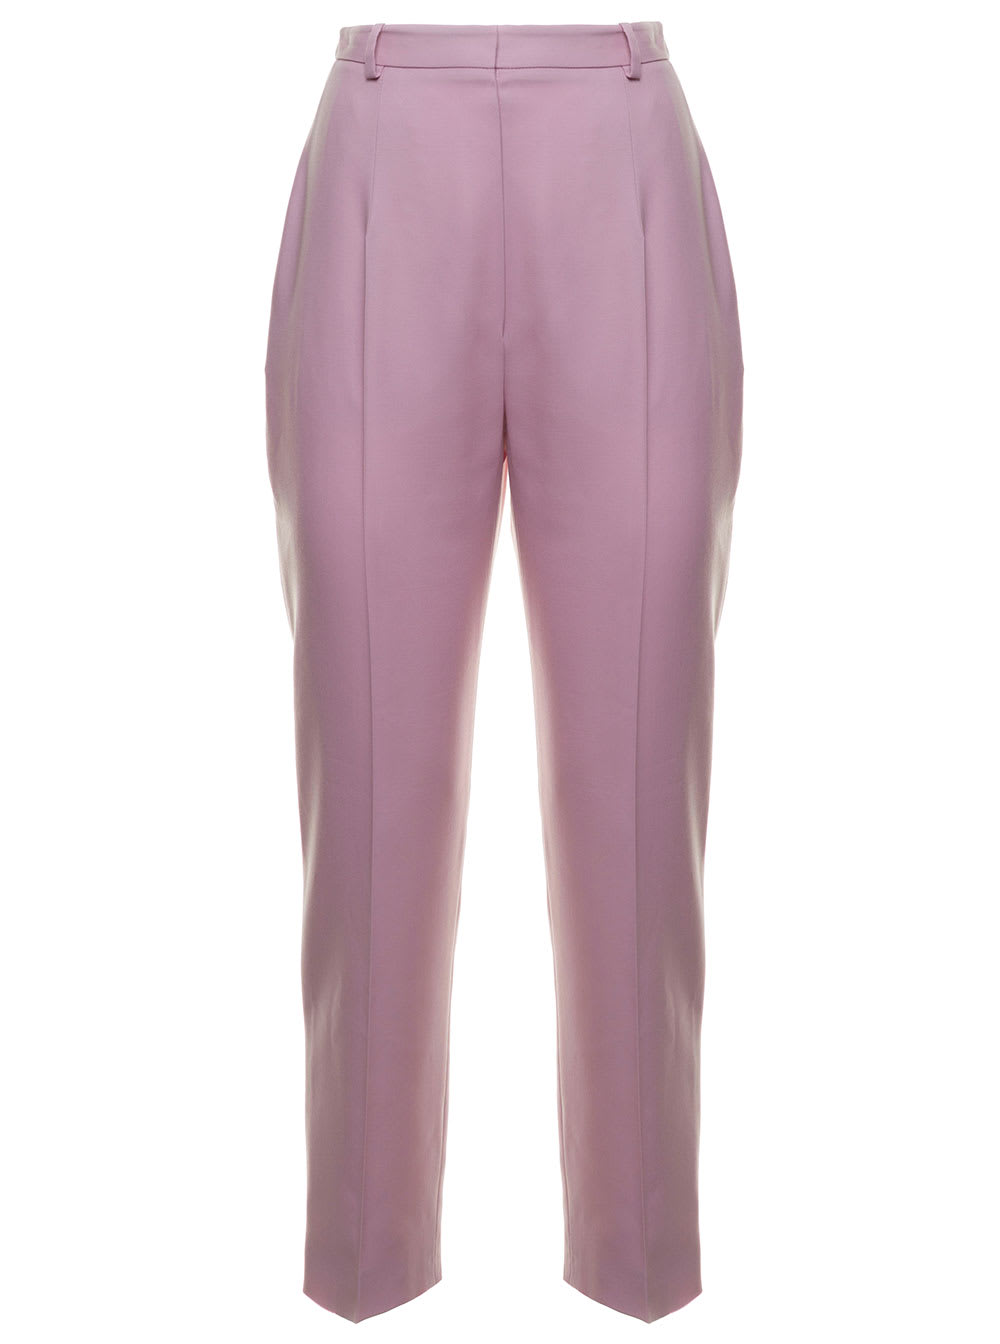 Alexander McQueen Lilac Wool Tailored Trousers